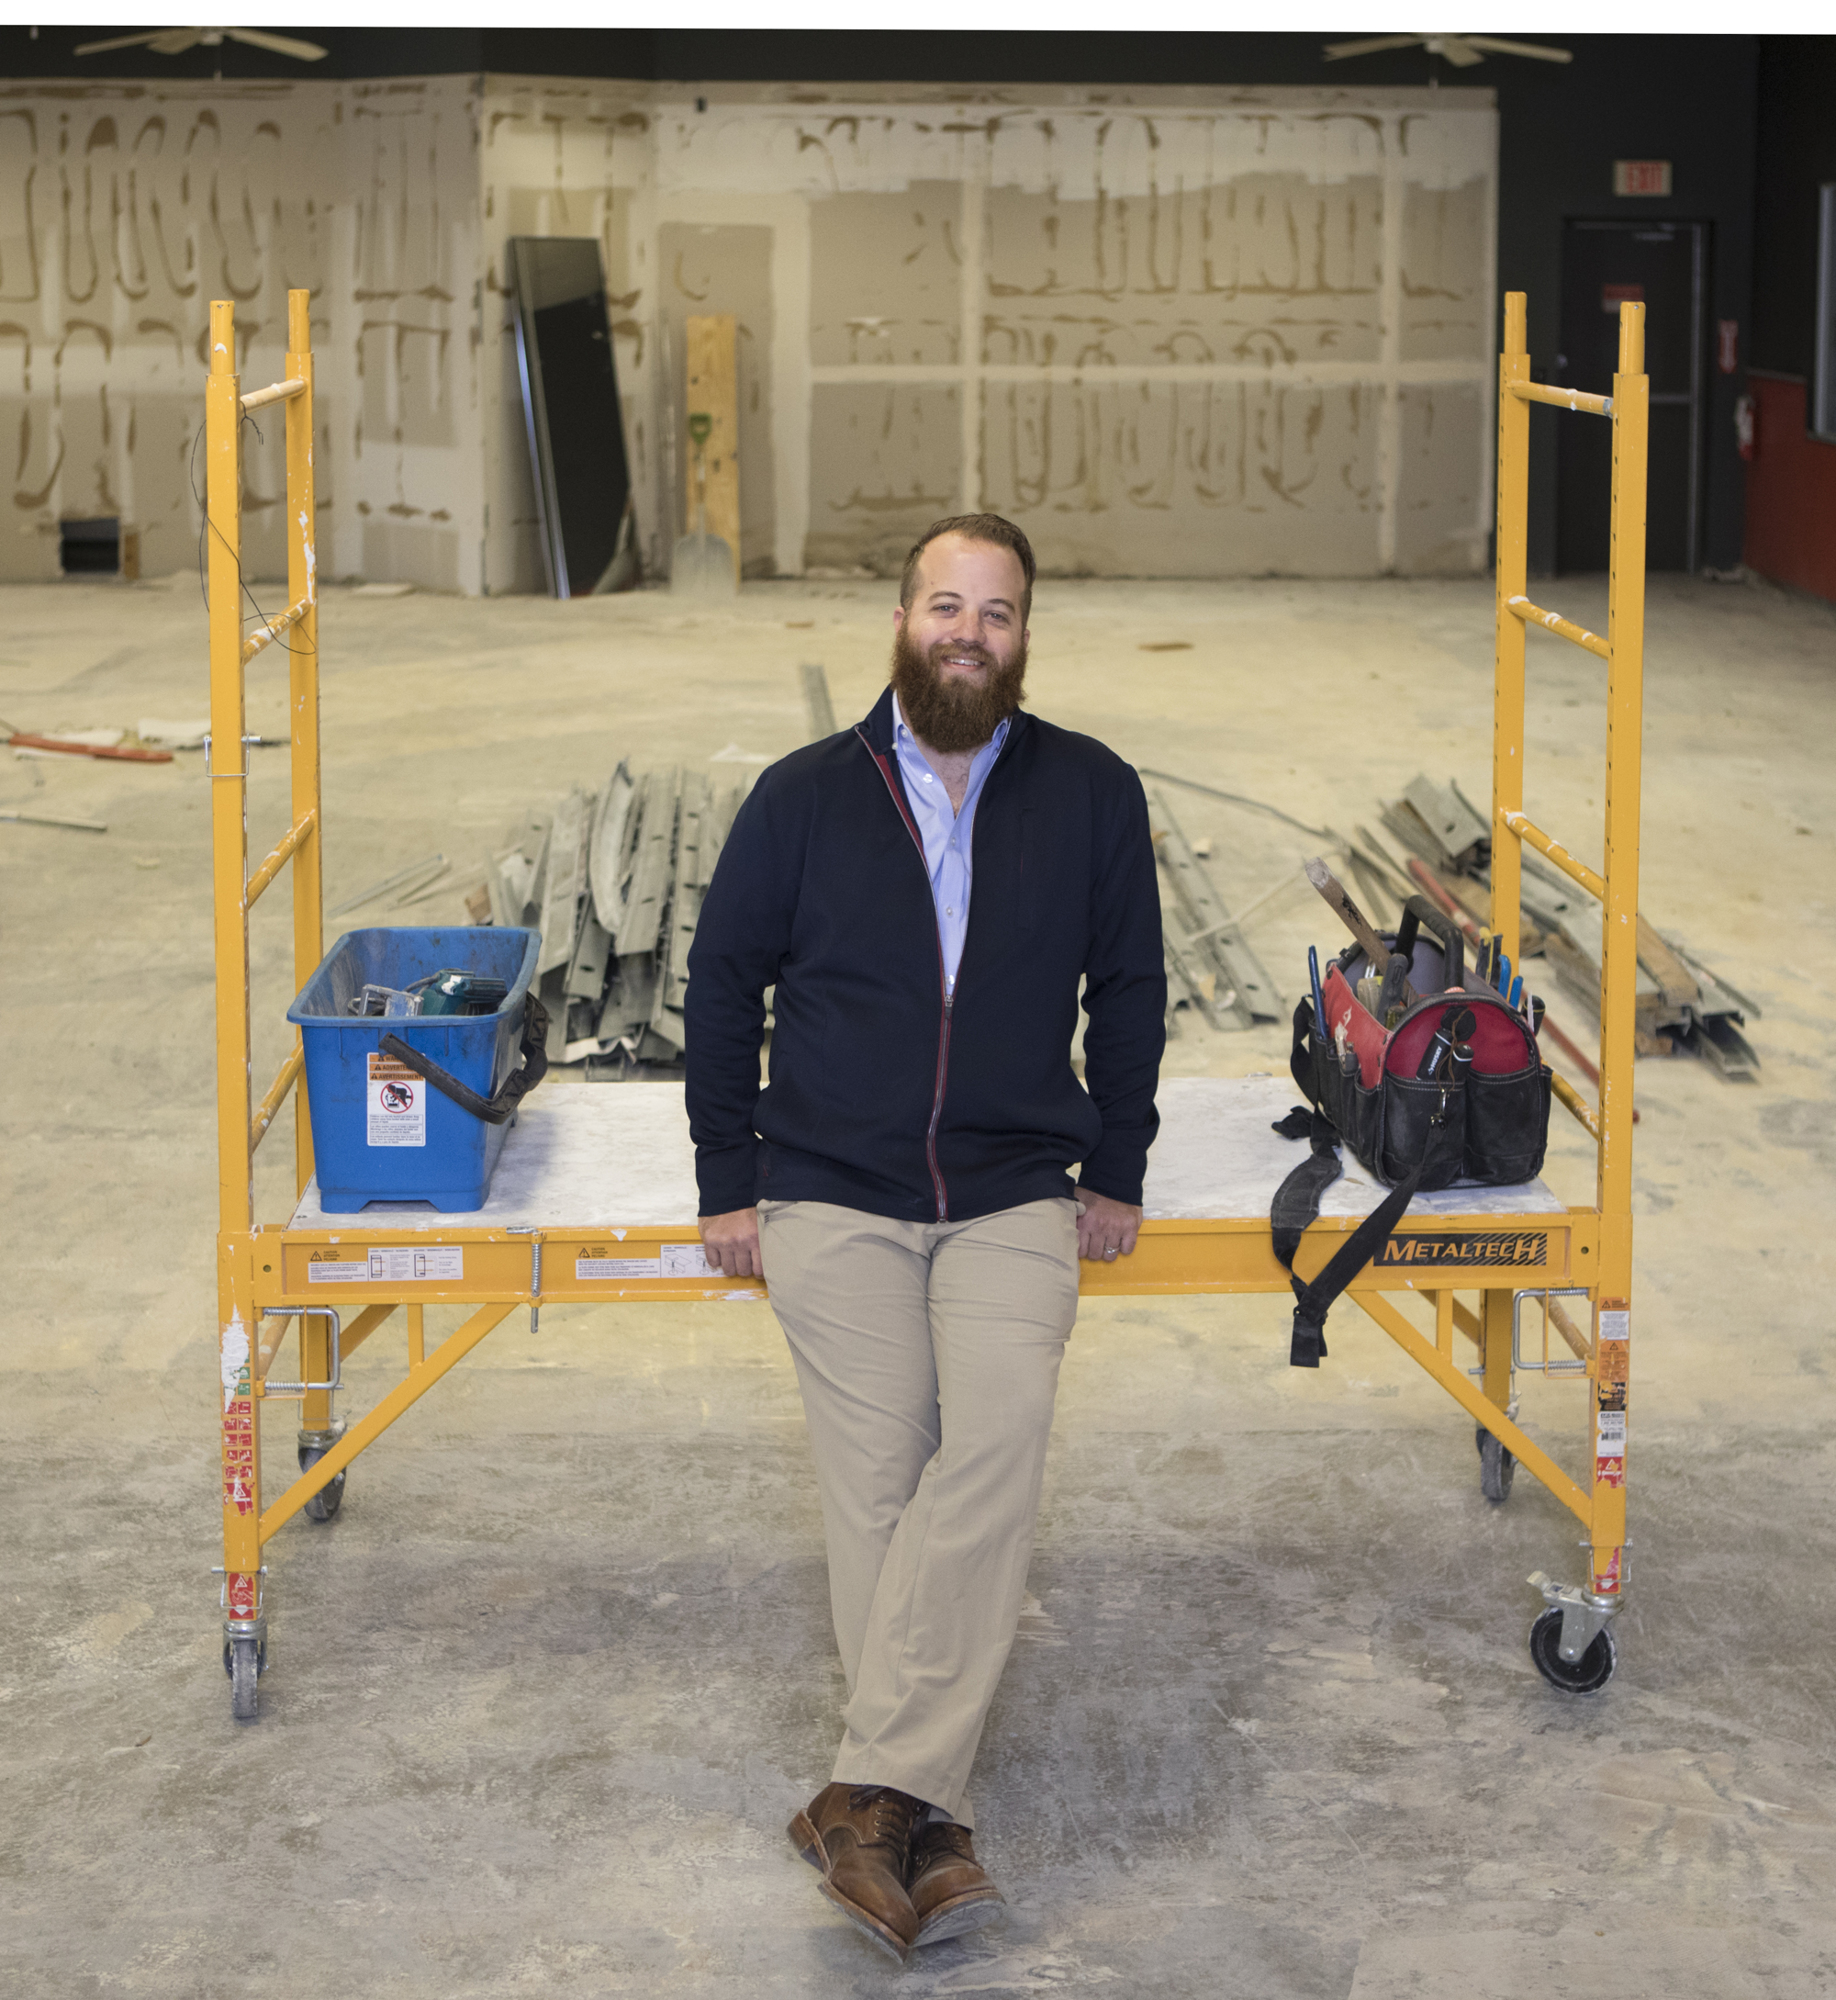 Mark Wemple. With a spacious new headquarters set to open in 2019, Master Restoration founder and CEO Jarrett Dixon is preparing big moves for the Clearwater-based company.